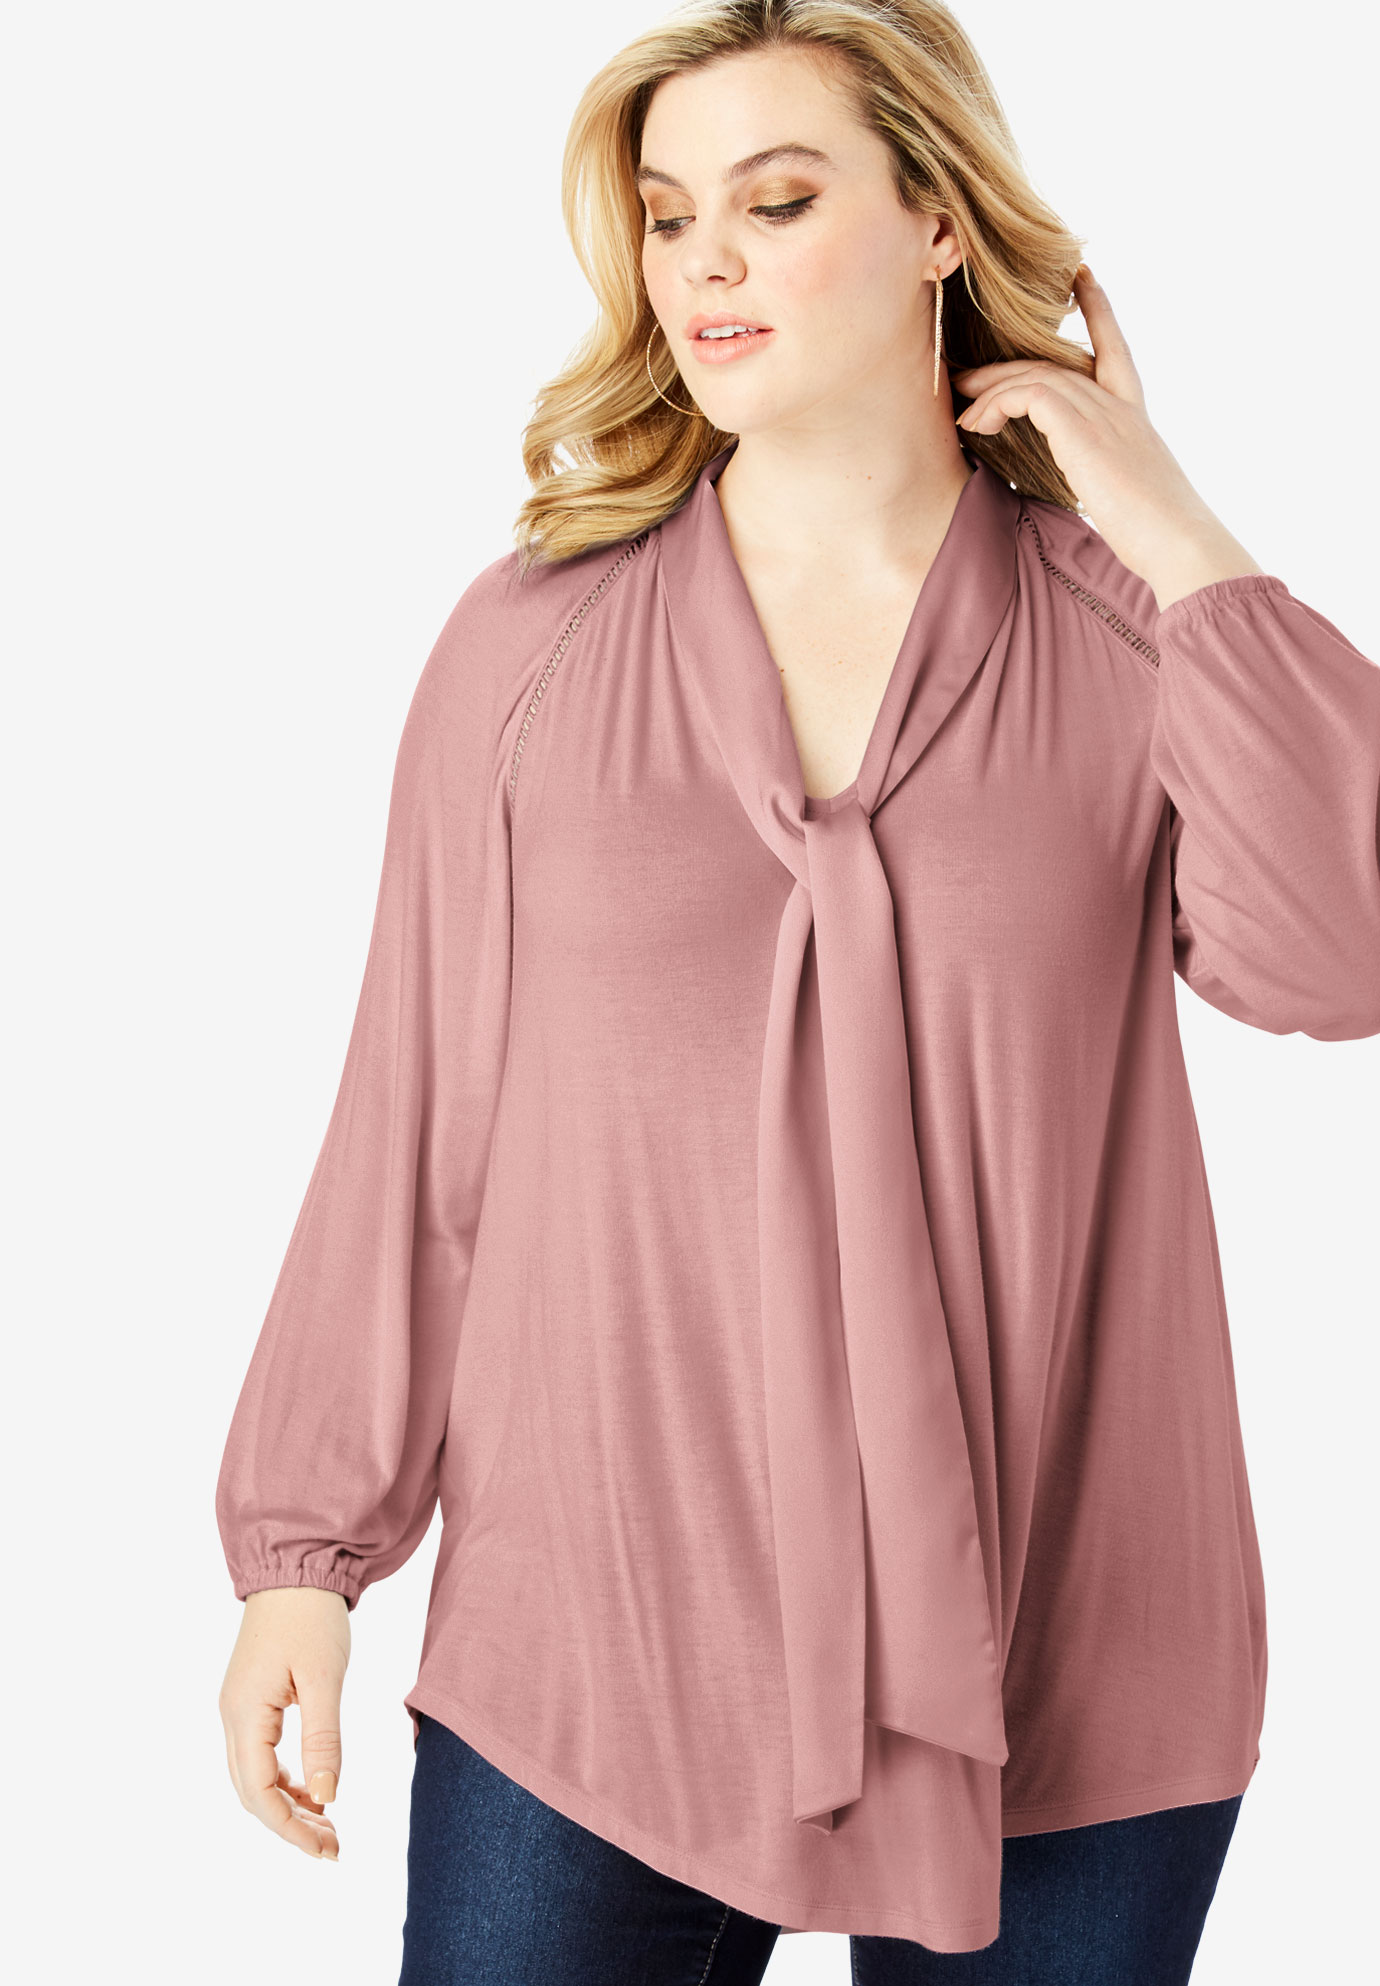 Bow-Tie Blouse with V-Neck | Woman Within